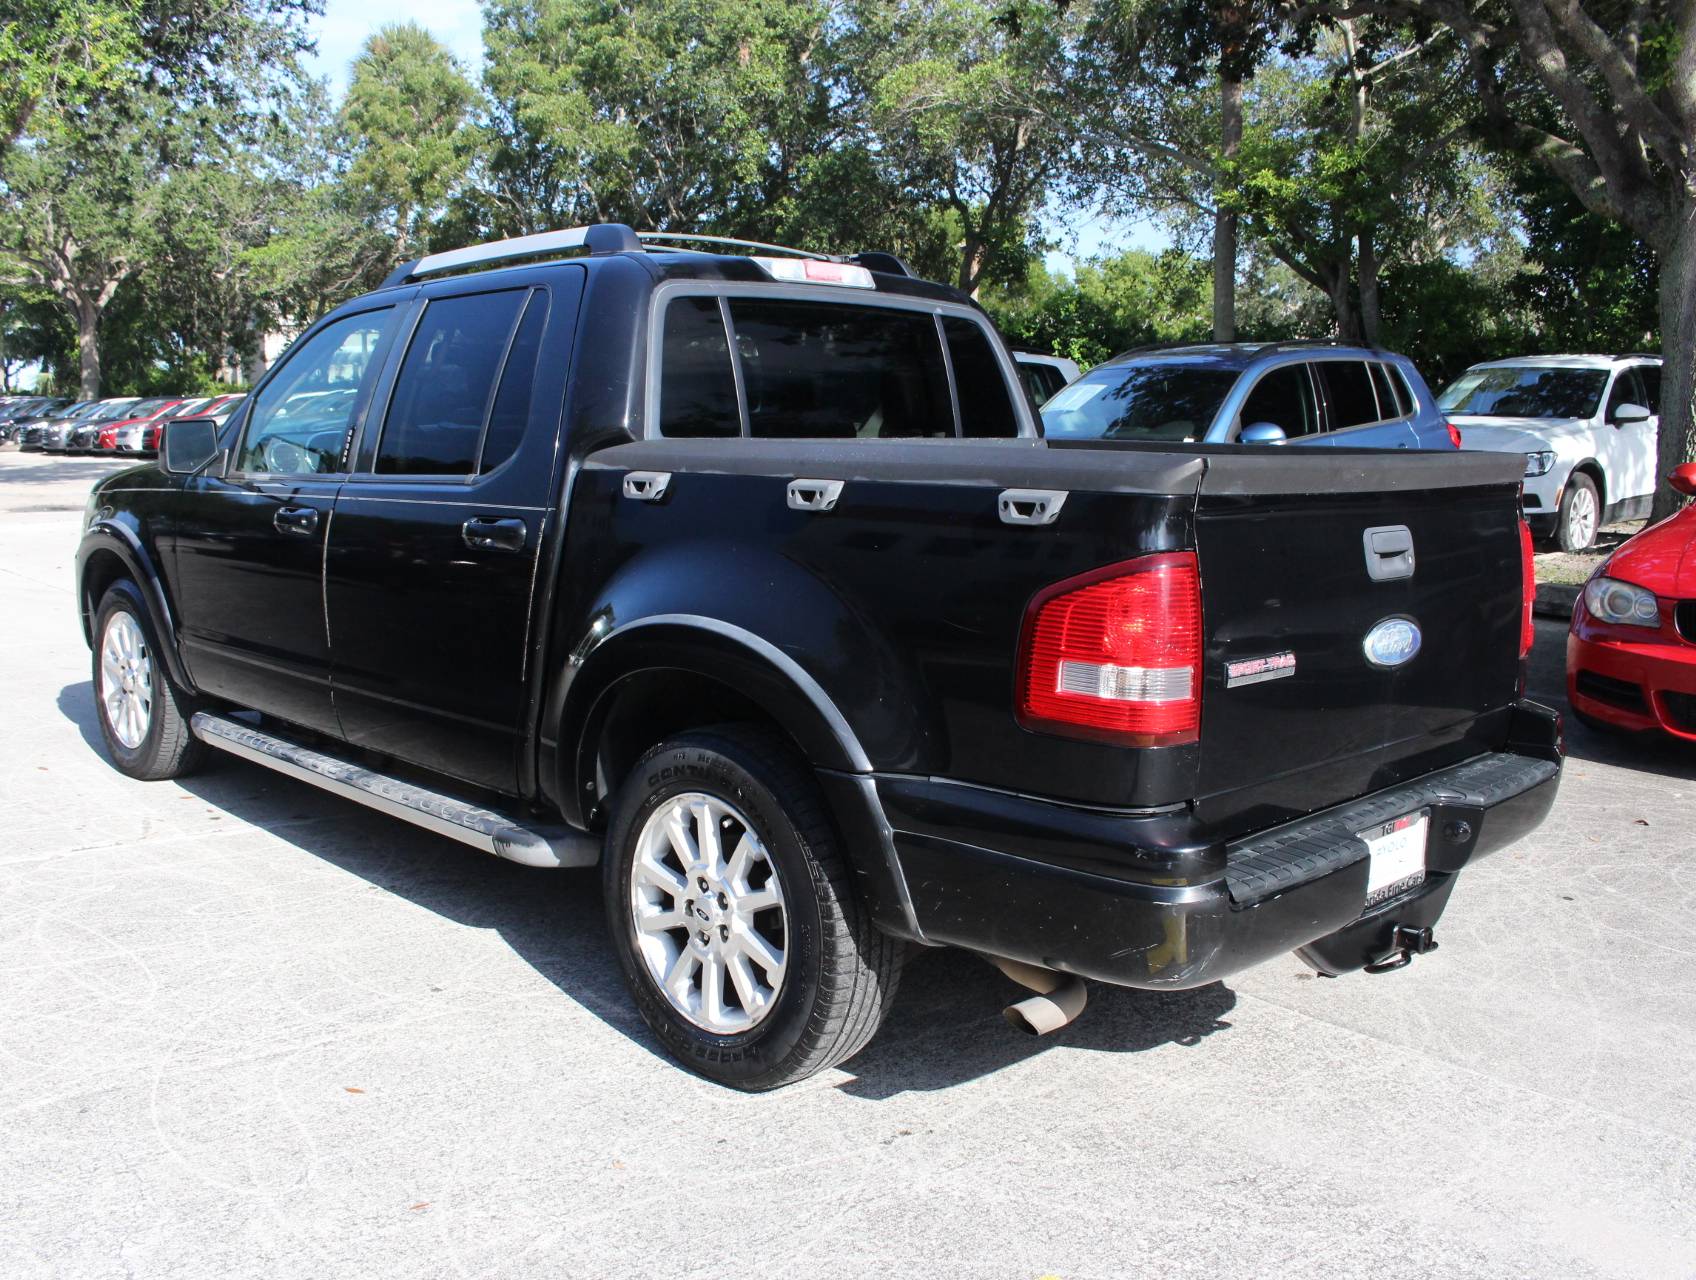 Florida Fine Cars - Used FORD EXPLORER SPORT TRAC 2008 WEST PALM LIMITED